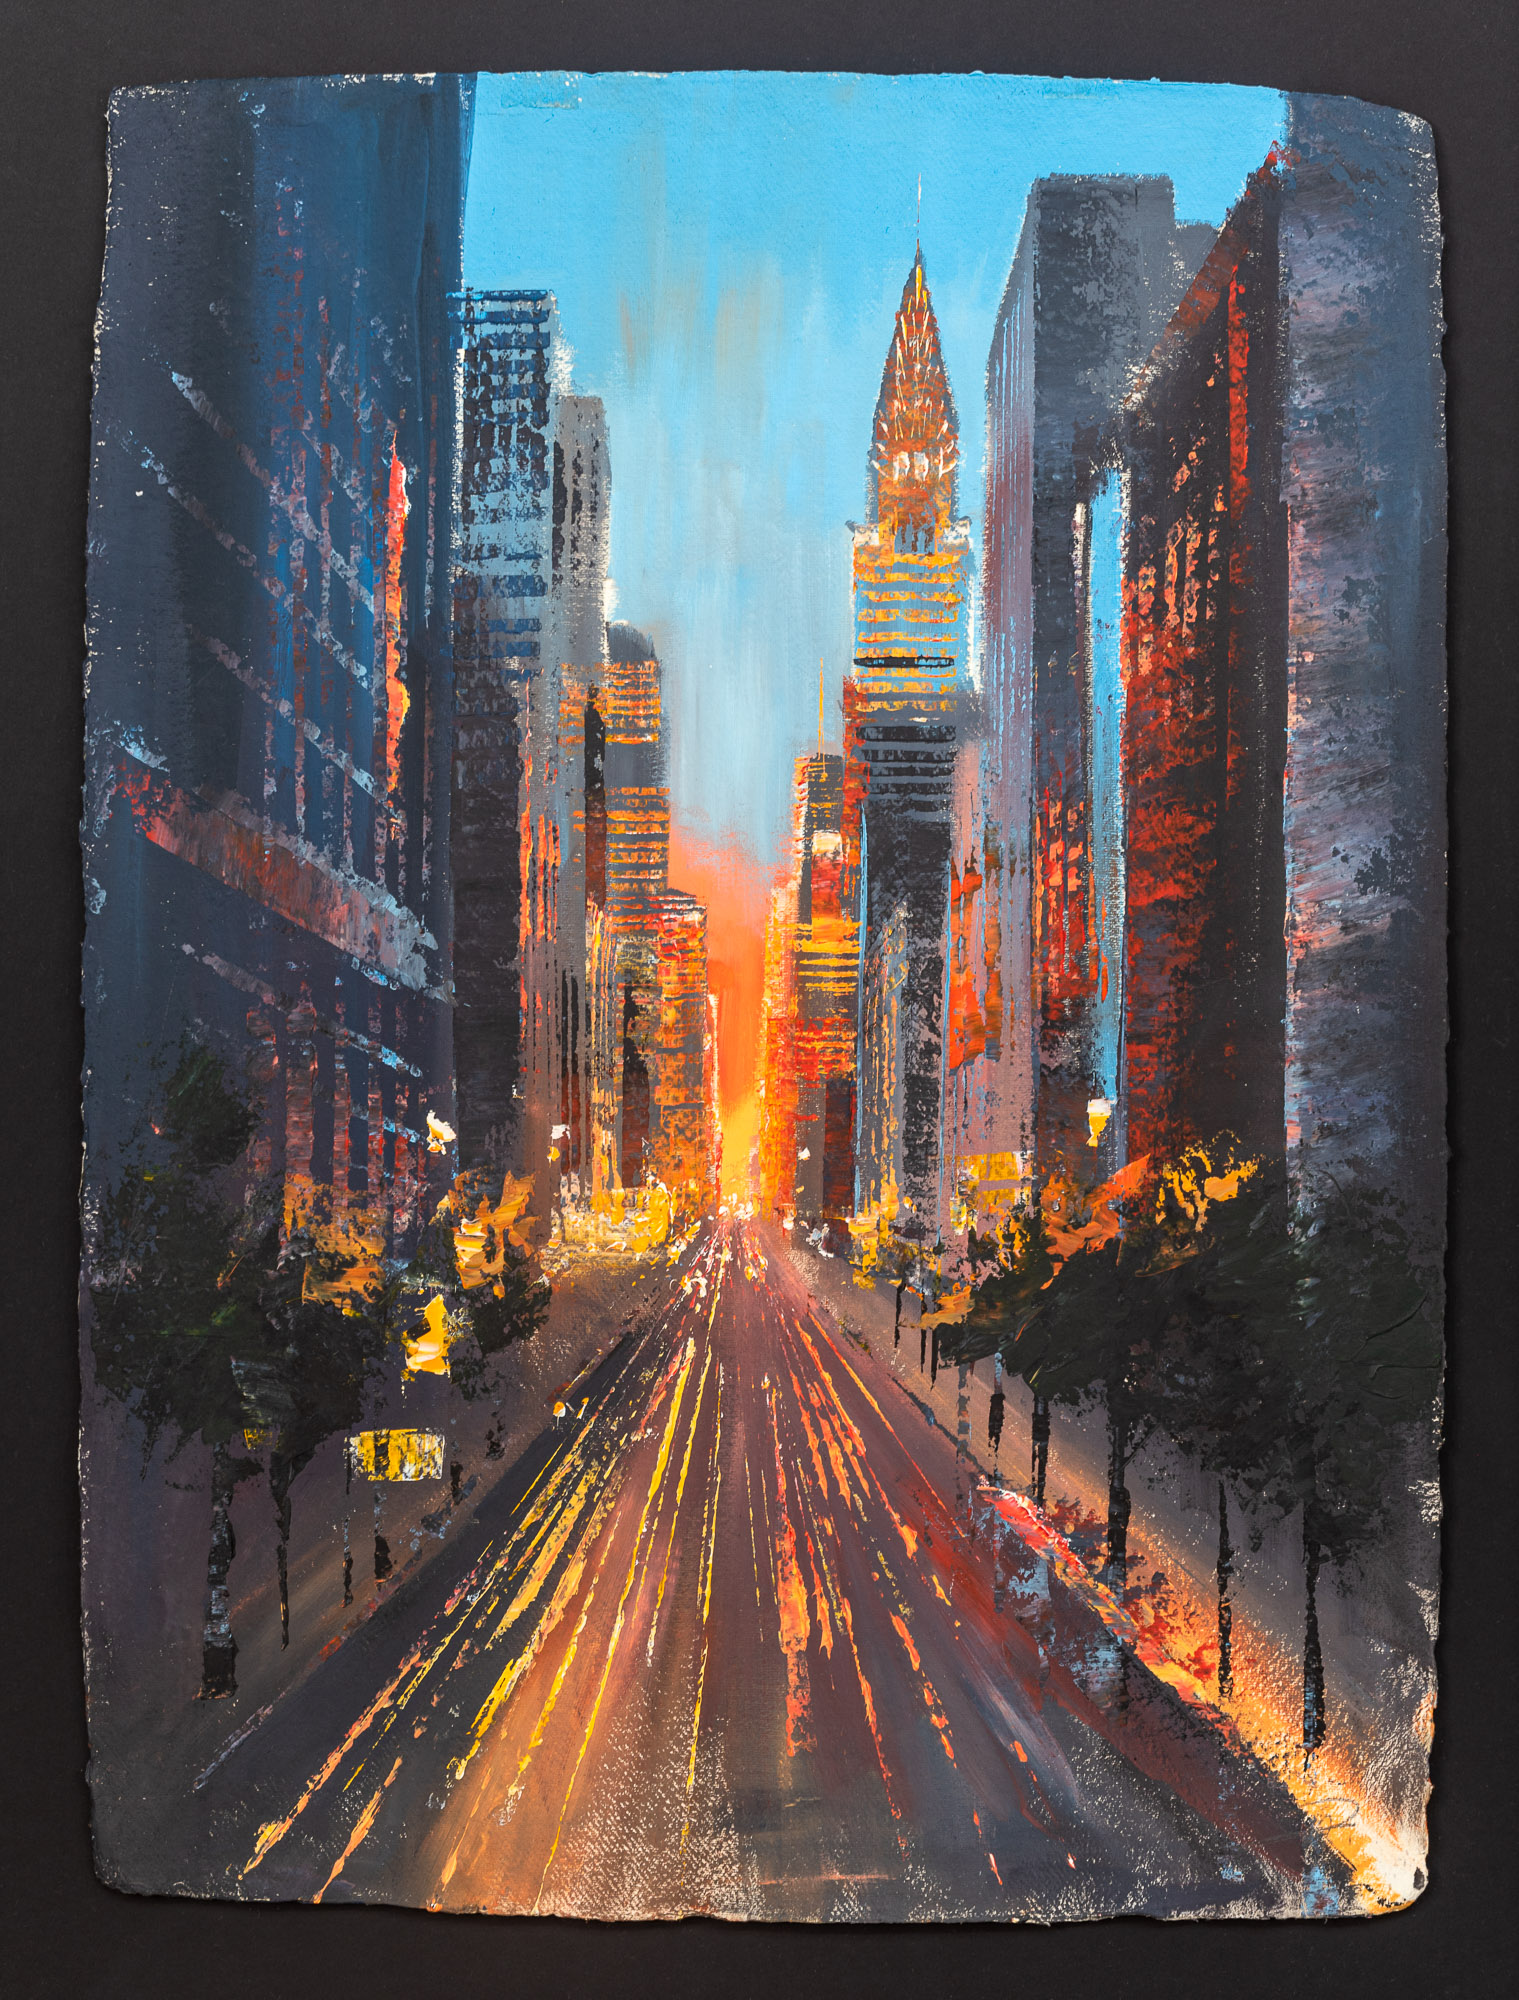 Skyscraper Central - Original Chsysler New York Sunset Painting by UK Contemporary Artist Paul Kenton, from the New York Collection